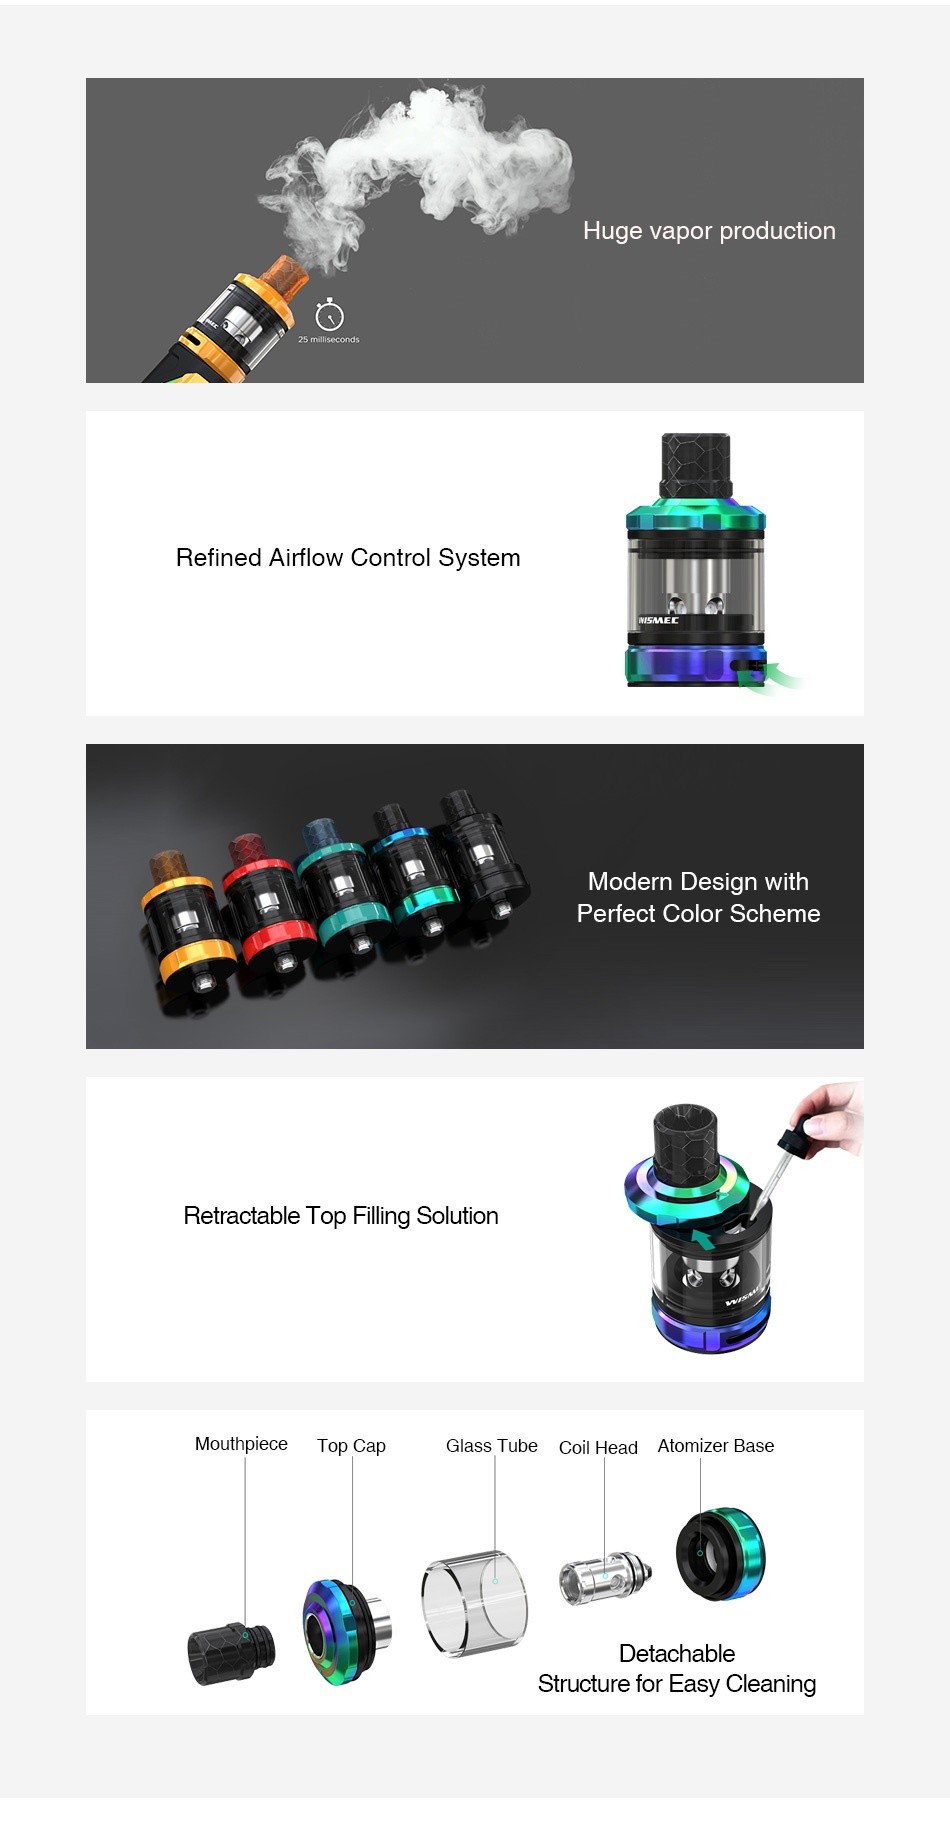 WISMEC AMOR NS Pro Atomizer 2ml Huge vapor production Refined Airflow Control system Modern Design with Perfect color scheme Retractable Top filling solution Mouthpiece Top Cap Glass Tube Coil head Atomizer base Detachable tructure for Easy Cleaning